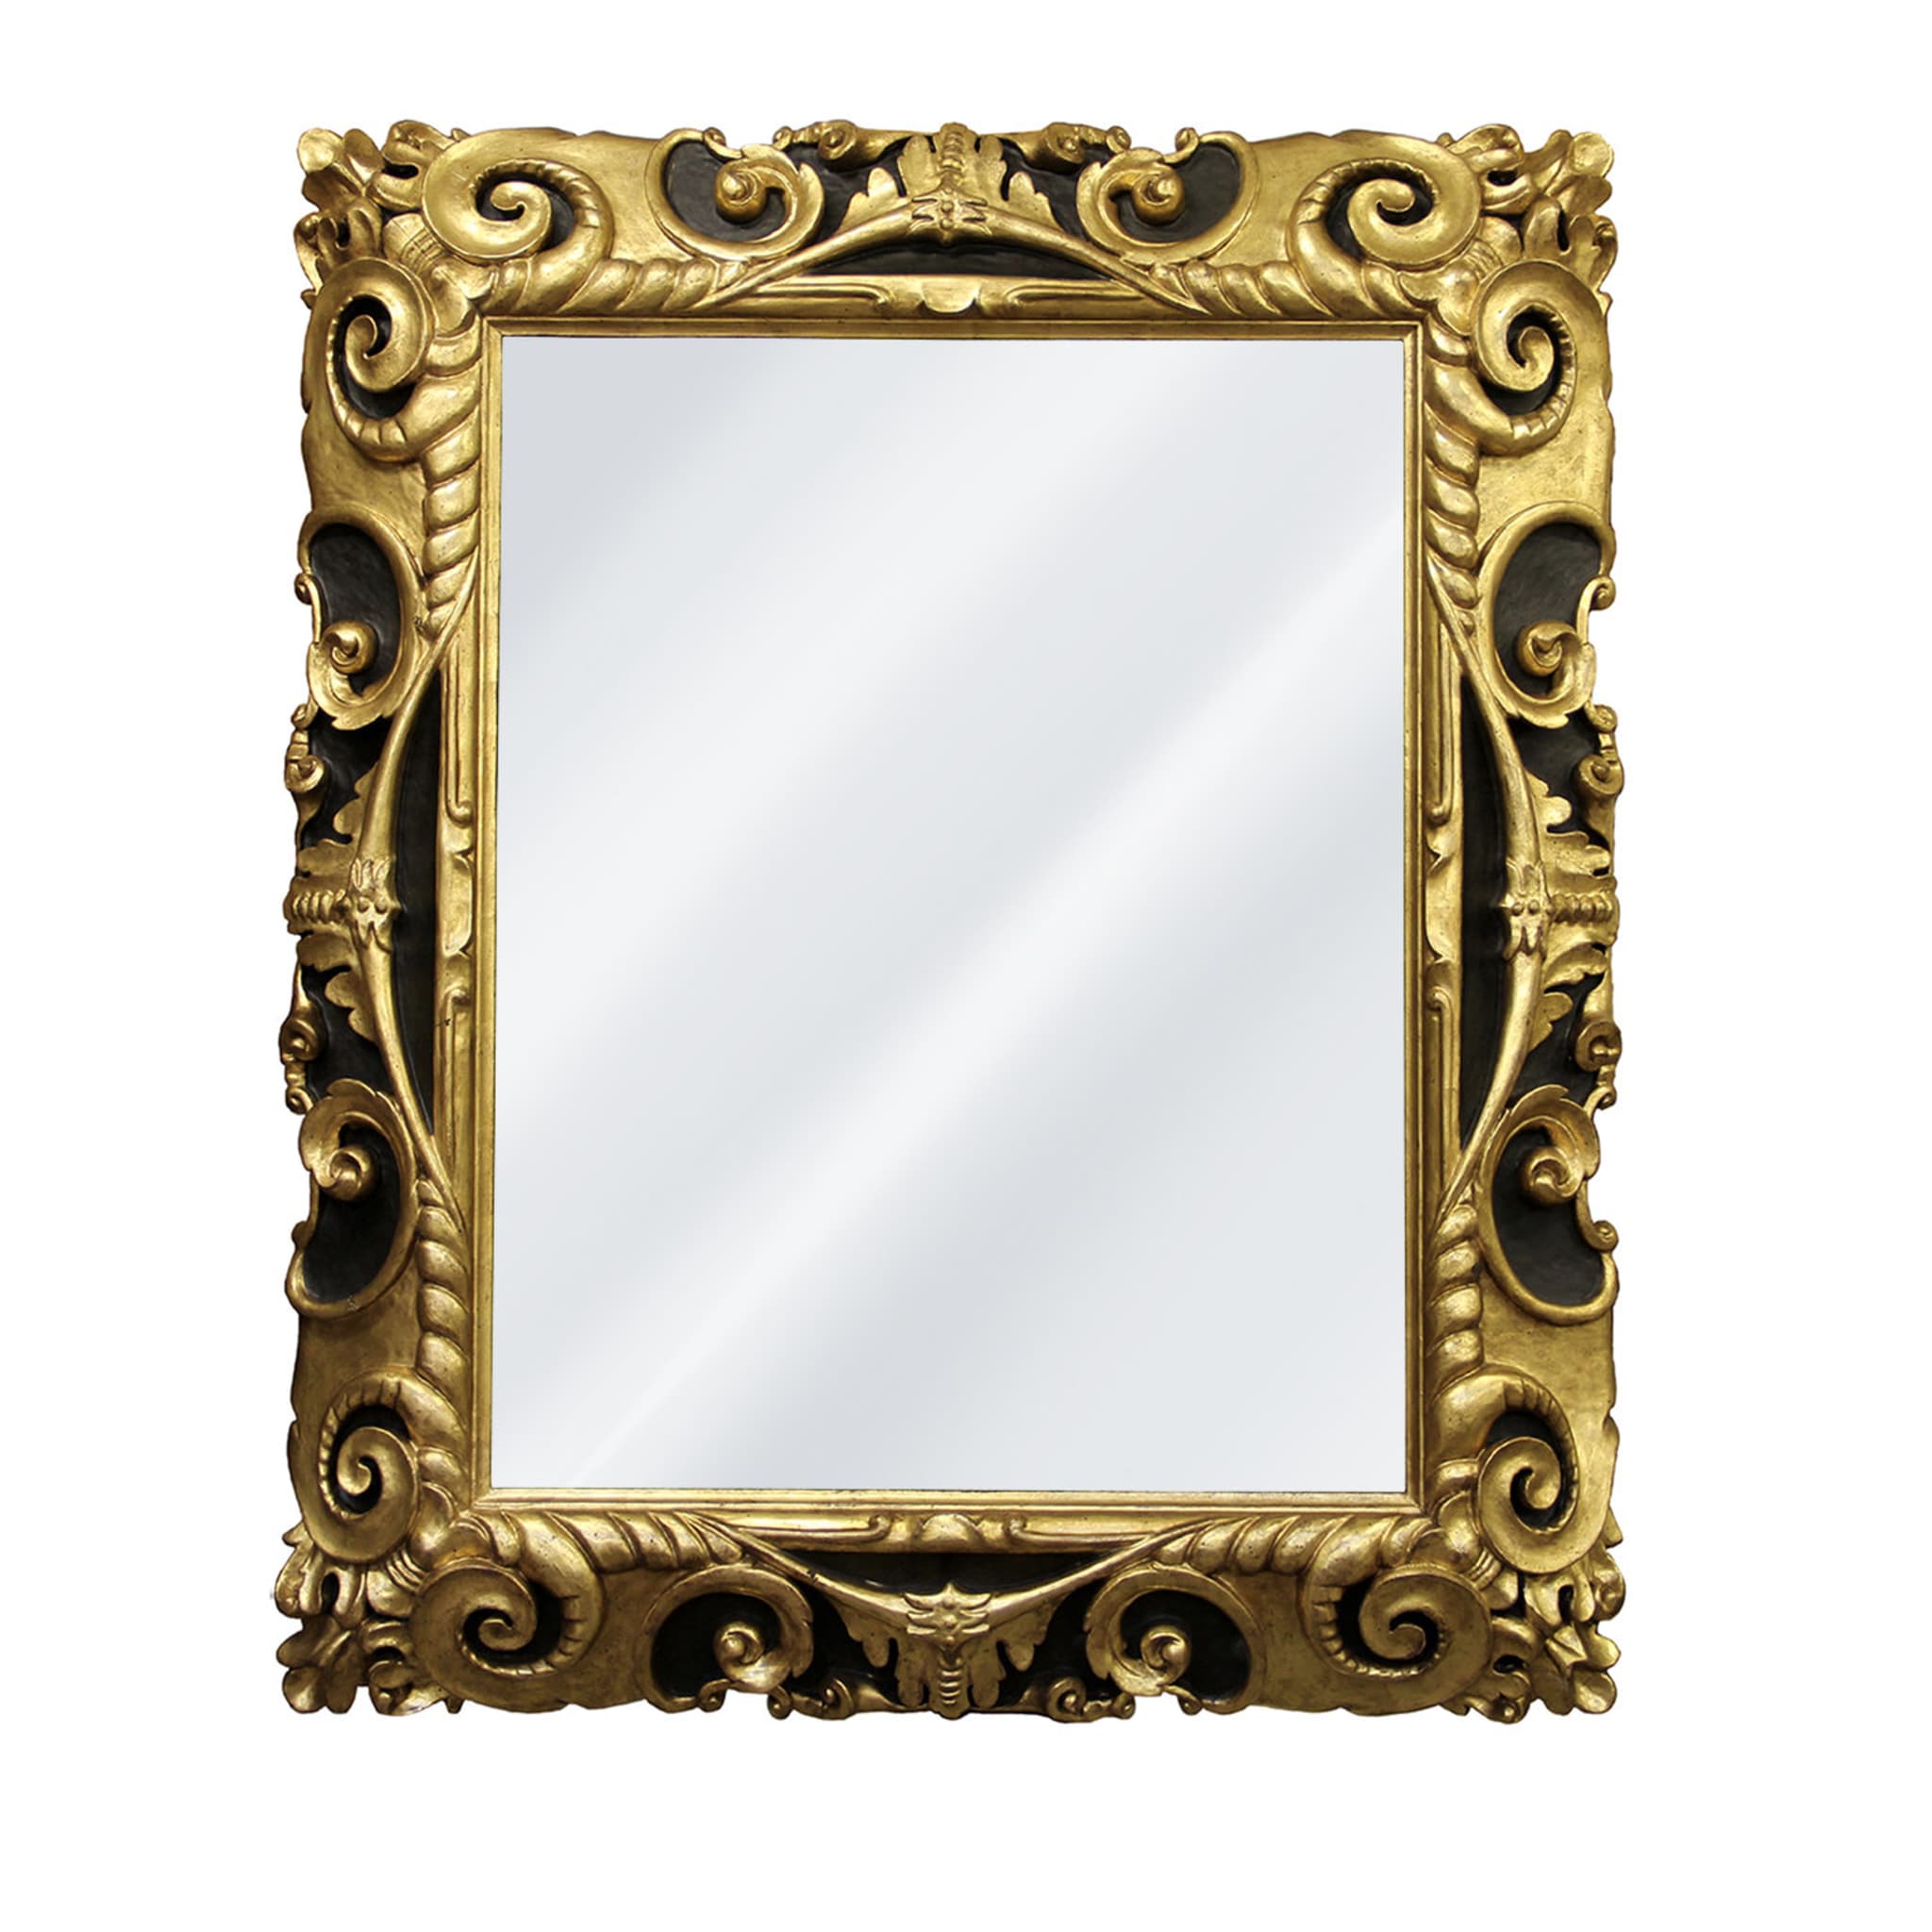 Fiorentina 1600 Black and Gold Framed Wall Mirror - Main view